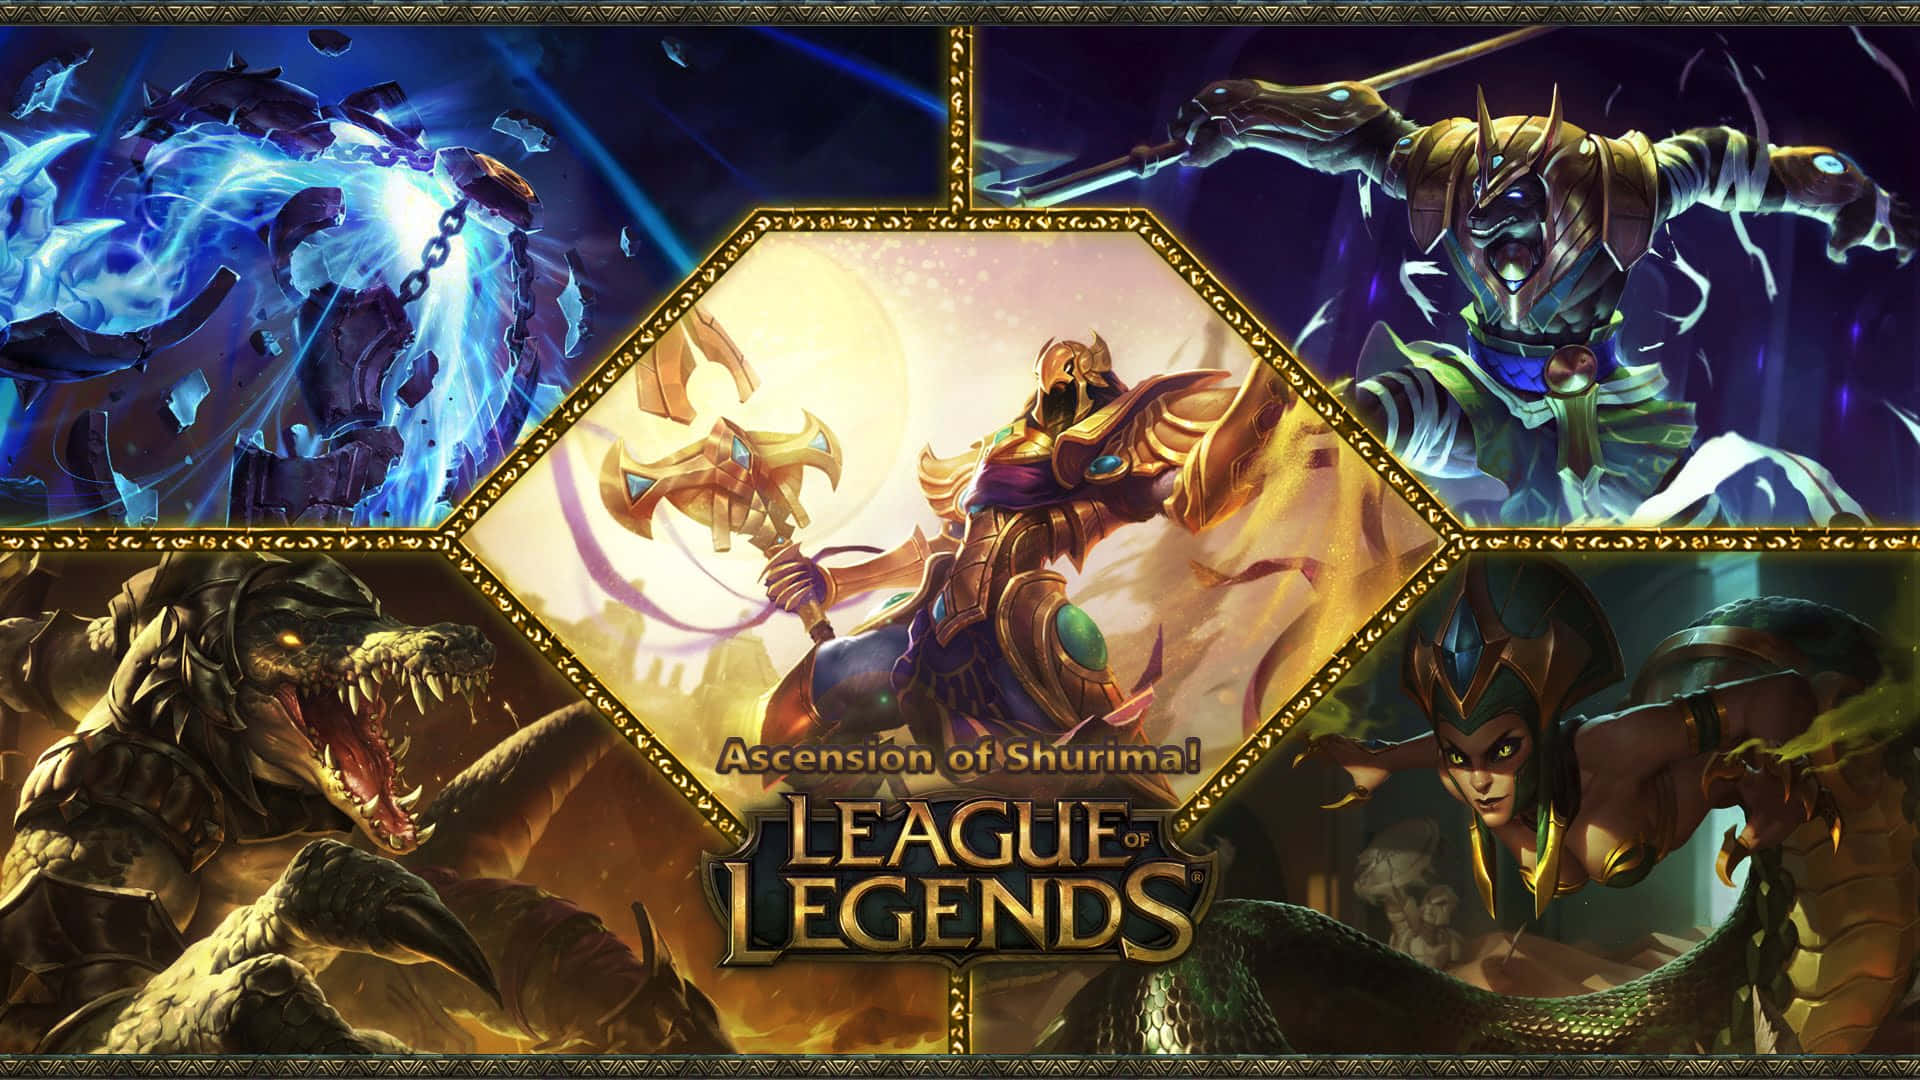 Lead Your Team to Victory in "League of Legends"